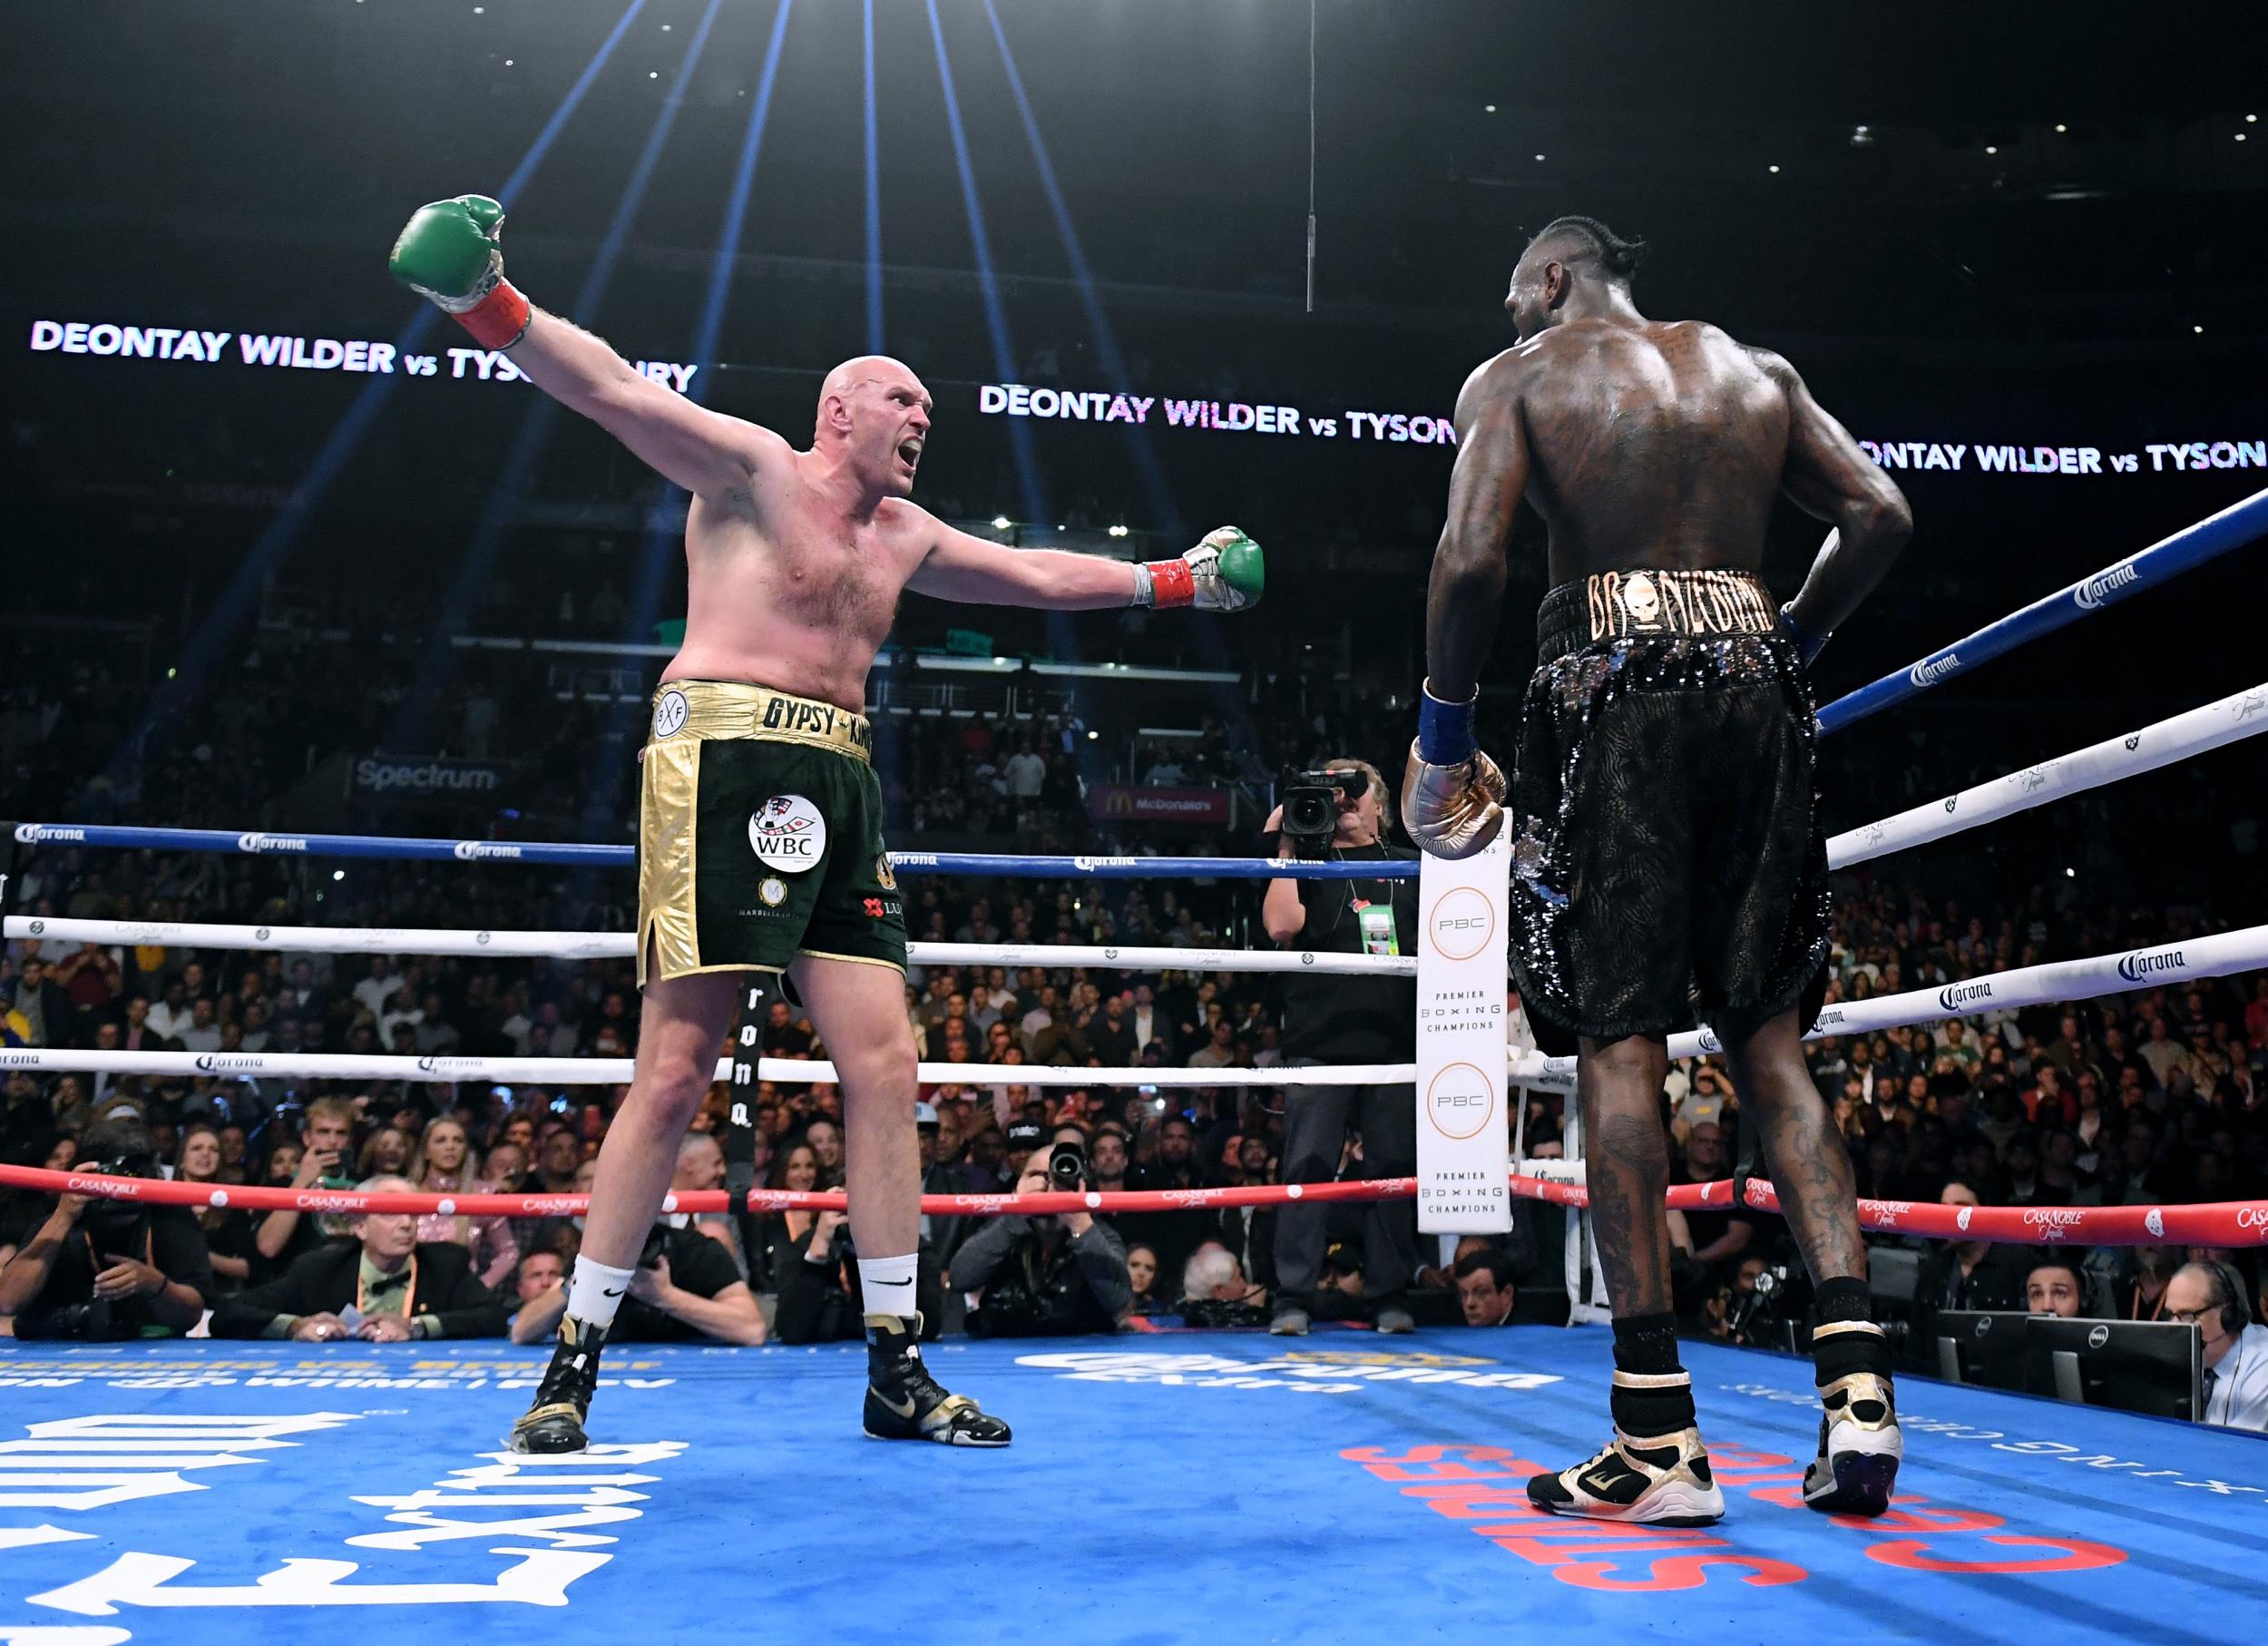 Wilder vs Fury High PPV price to watch fight live could push fans towards illegal free links, experts warn The Independent The Independent